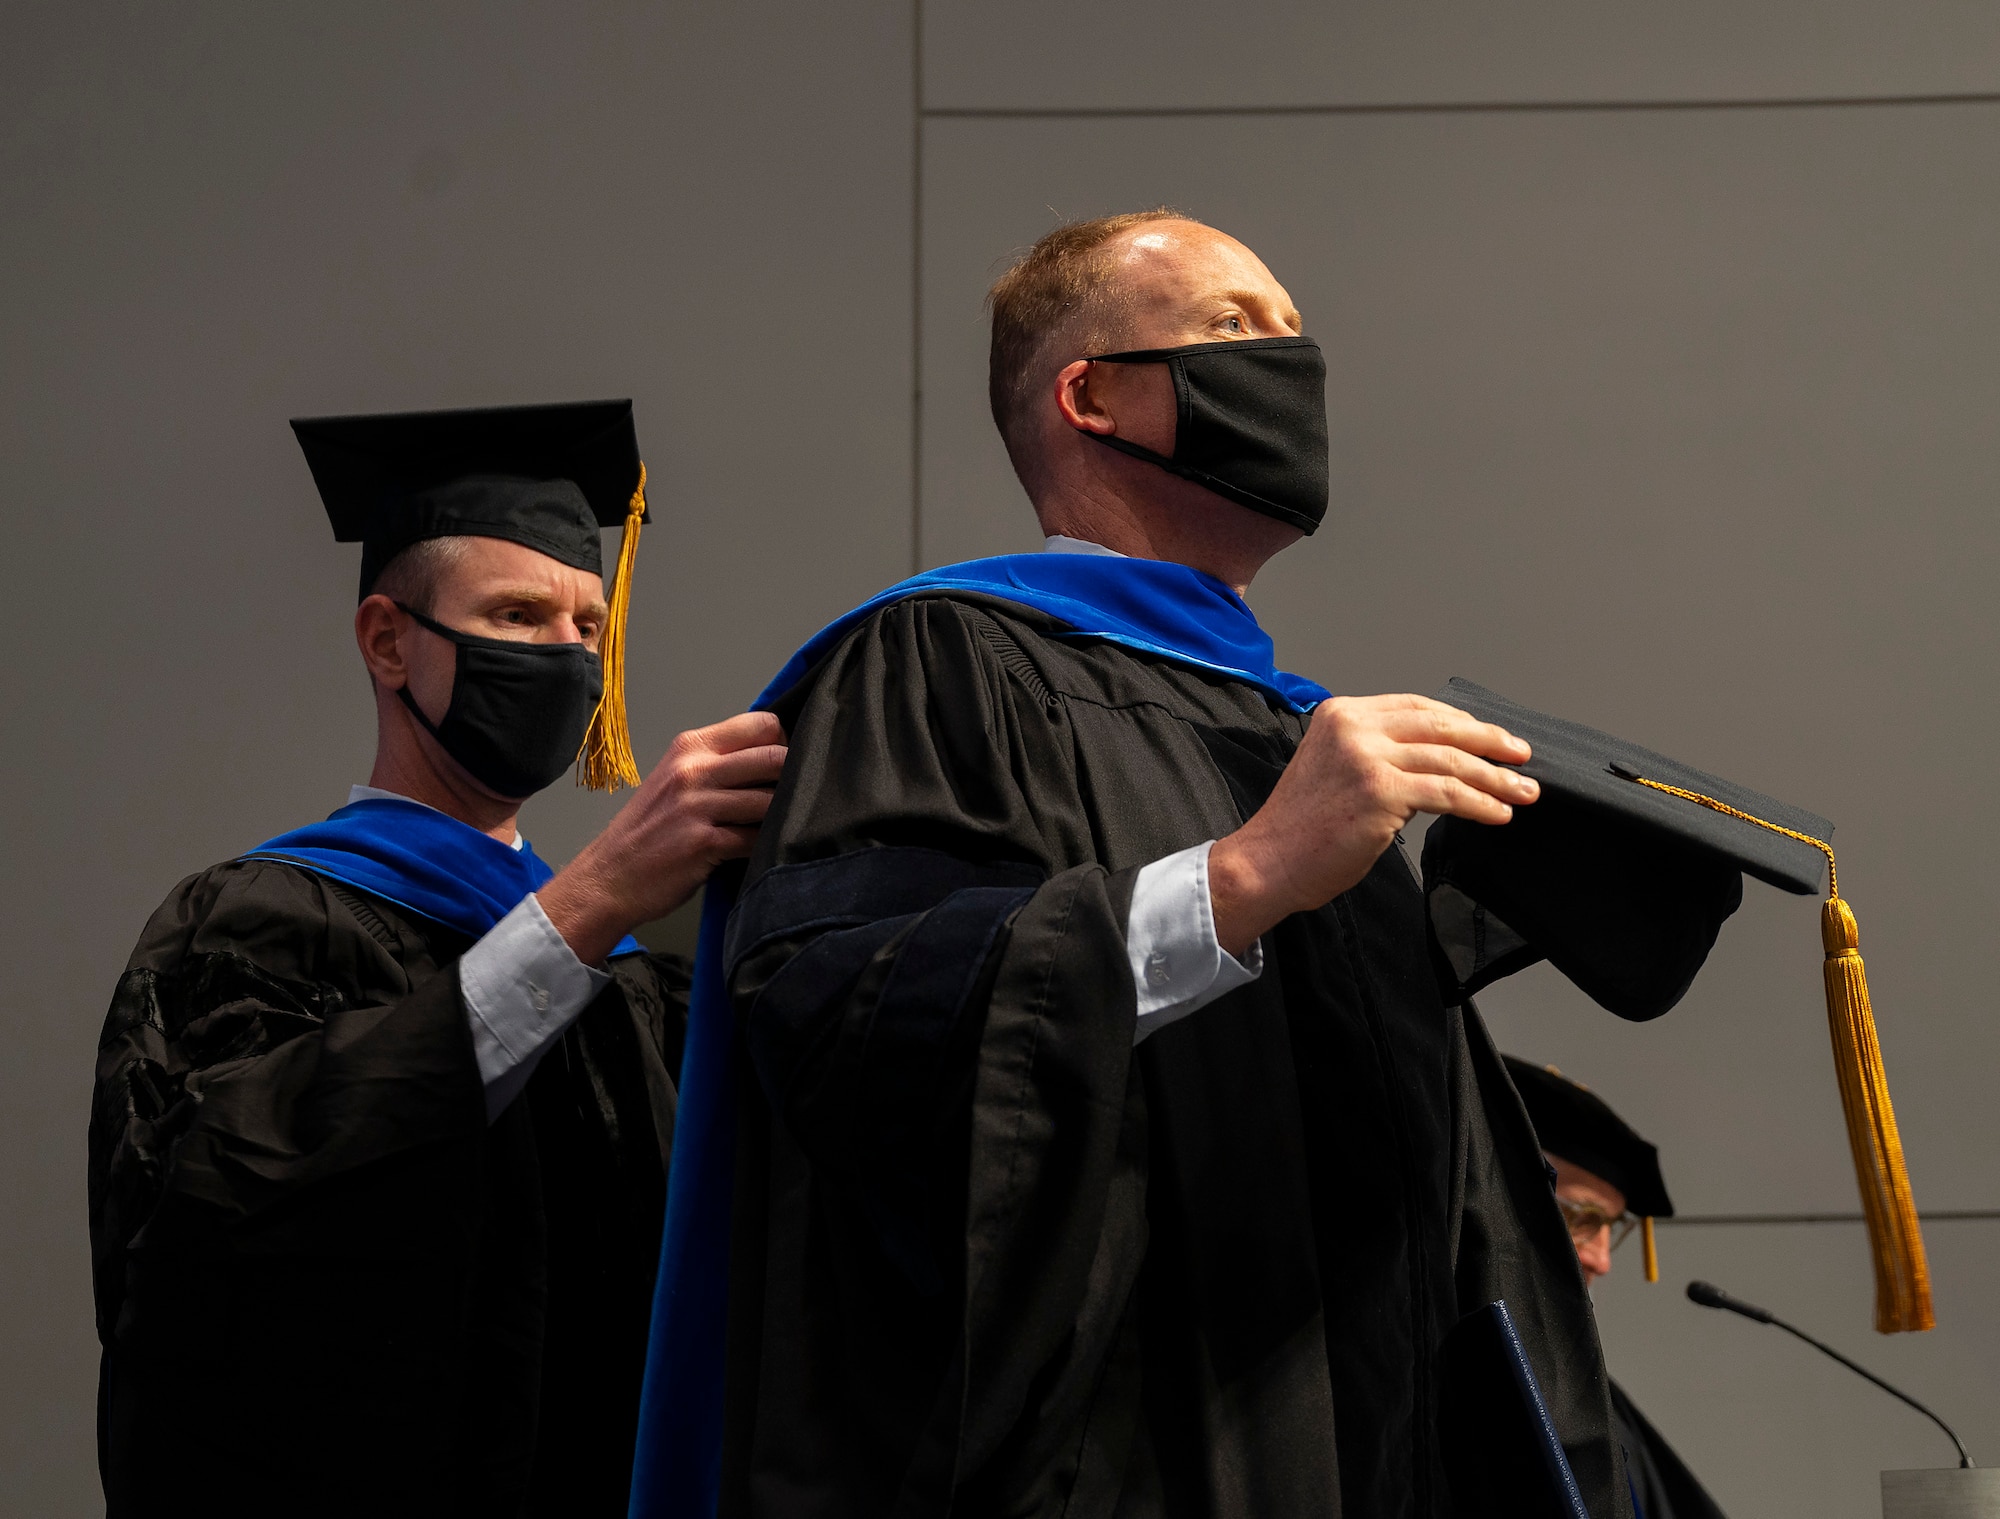 During an Air Force Institute of Technology graduation ceremony on Sept. 16, 2021, Lt. Col. James Rutledge, associate professor of aerospace engineering and senior military faculty, adjusts the hood of his student, Lt. Col. Matthew Fuqua, as Fuqua receives his Doctor of Philosophy in Aeronautical Engineering. (U.S. Air Force photo by R.J. Oriez)